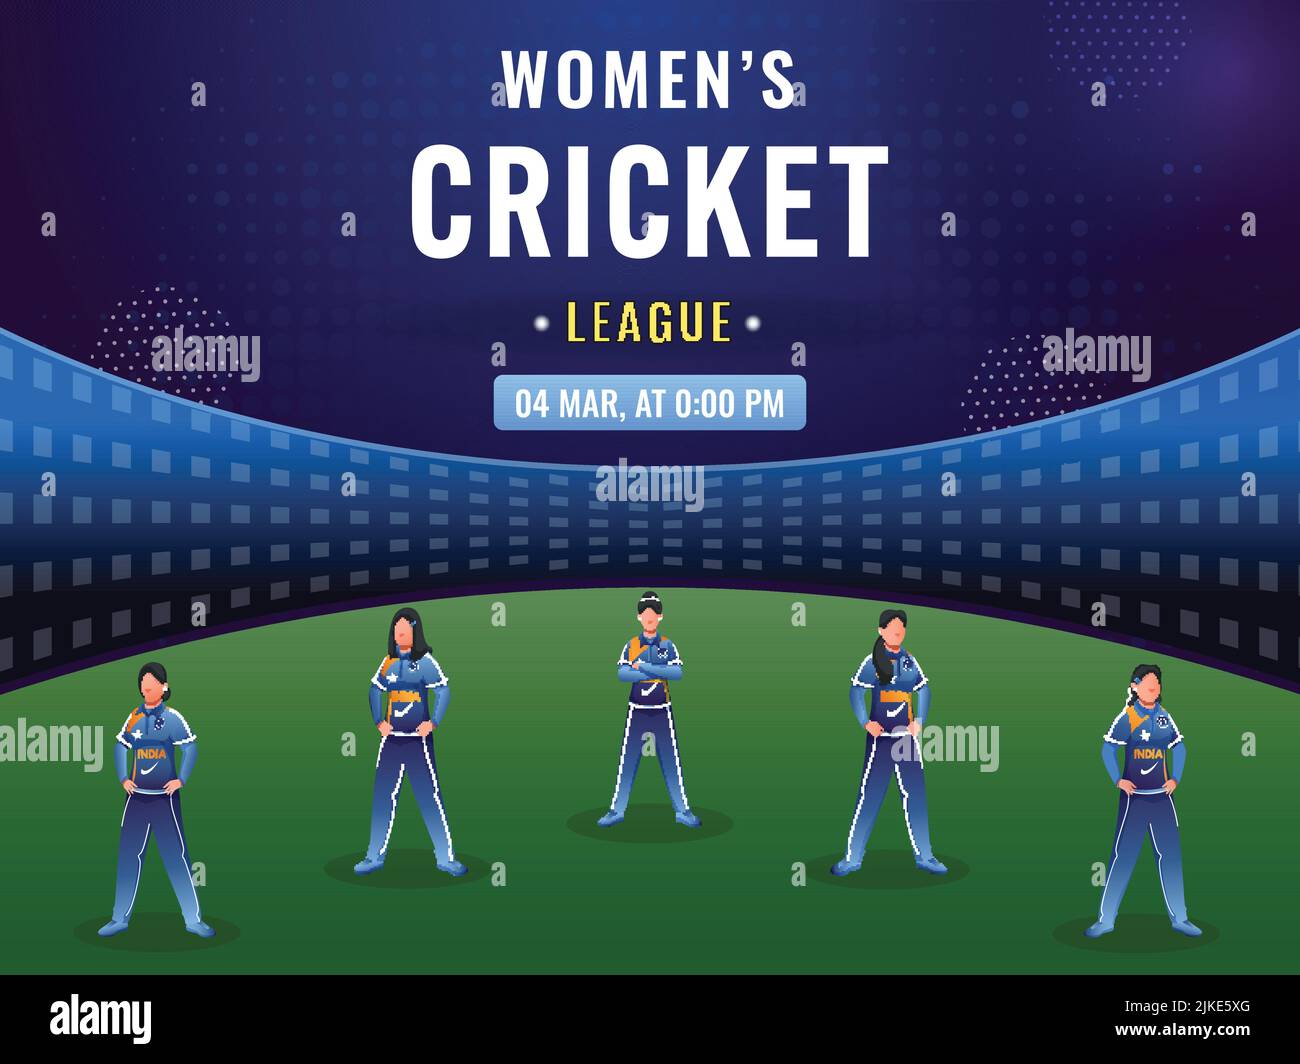 Women's Cricket League Concept With India Female Cricketer Players On Green And Blue Playground View. Stock Vector